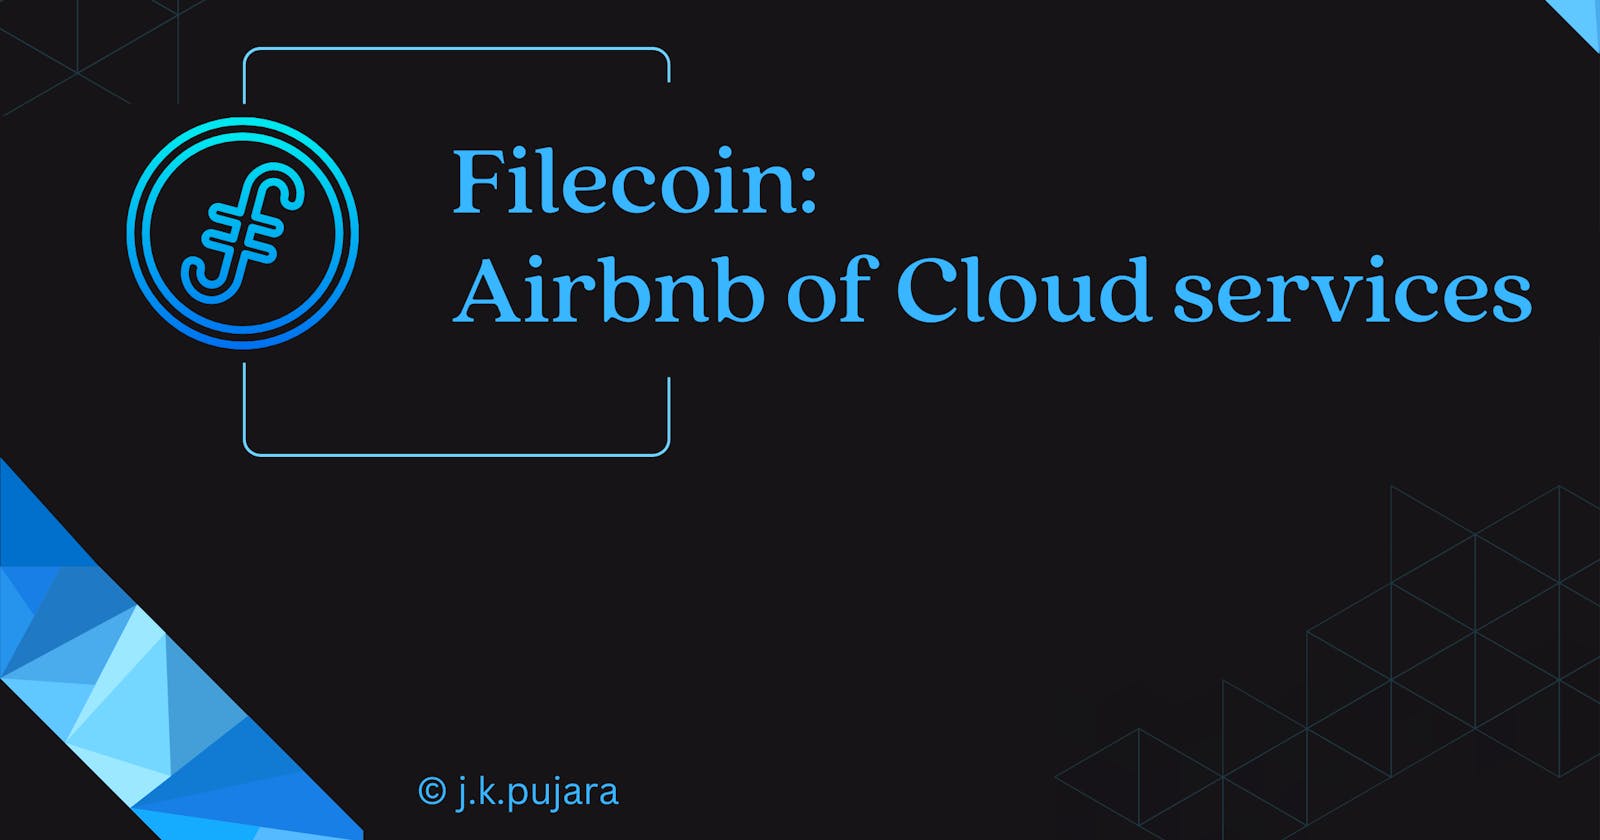 Filecoin: Airbnb of cloud services